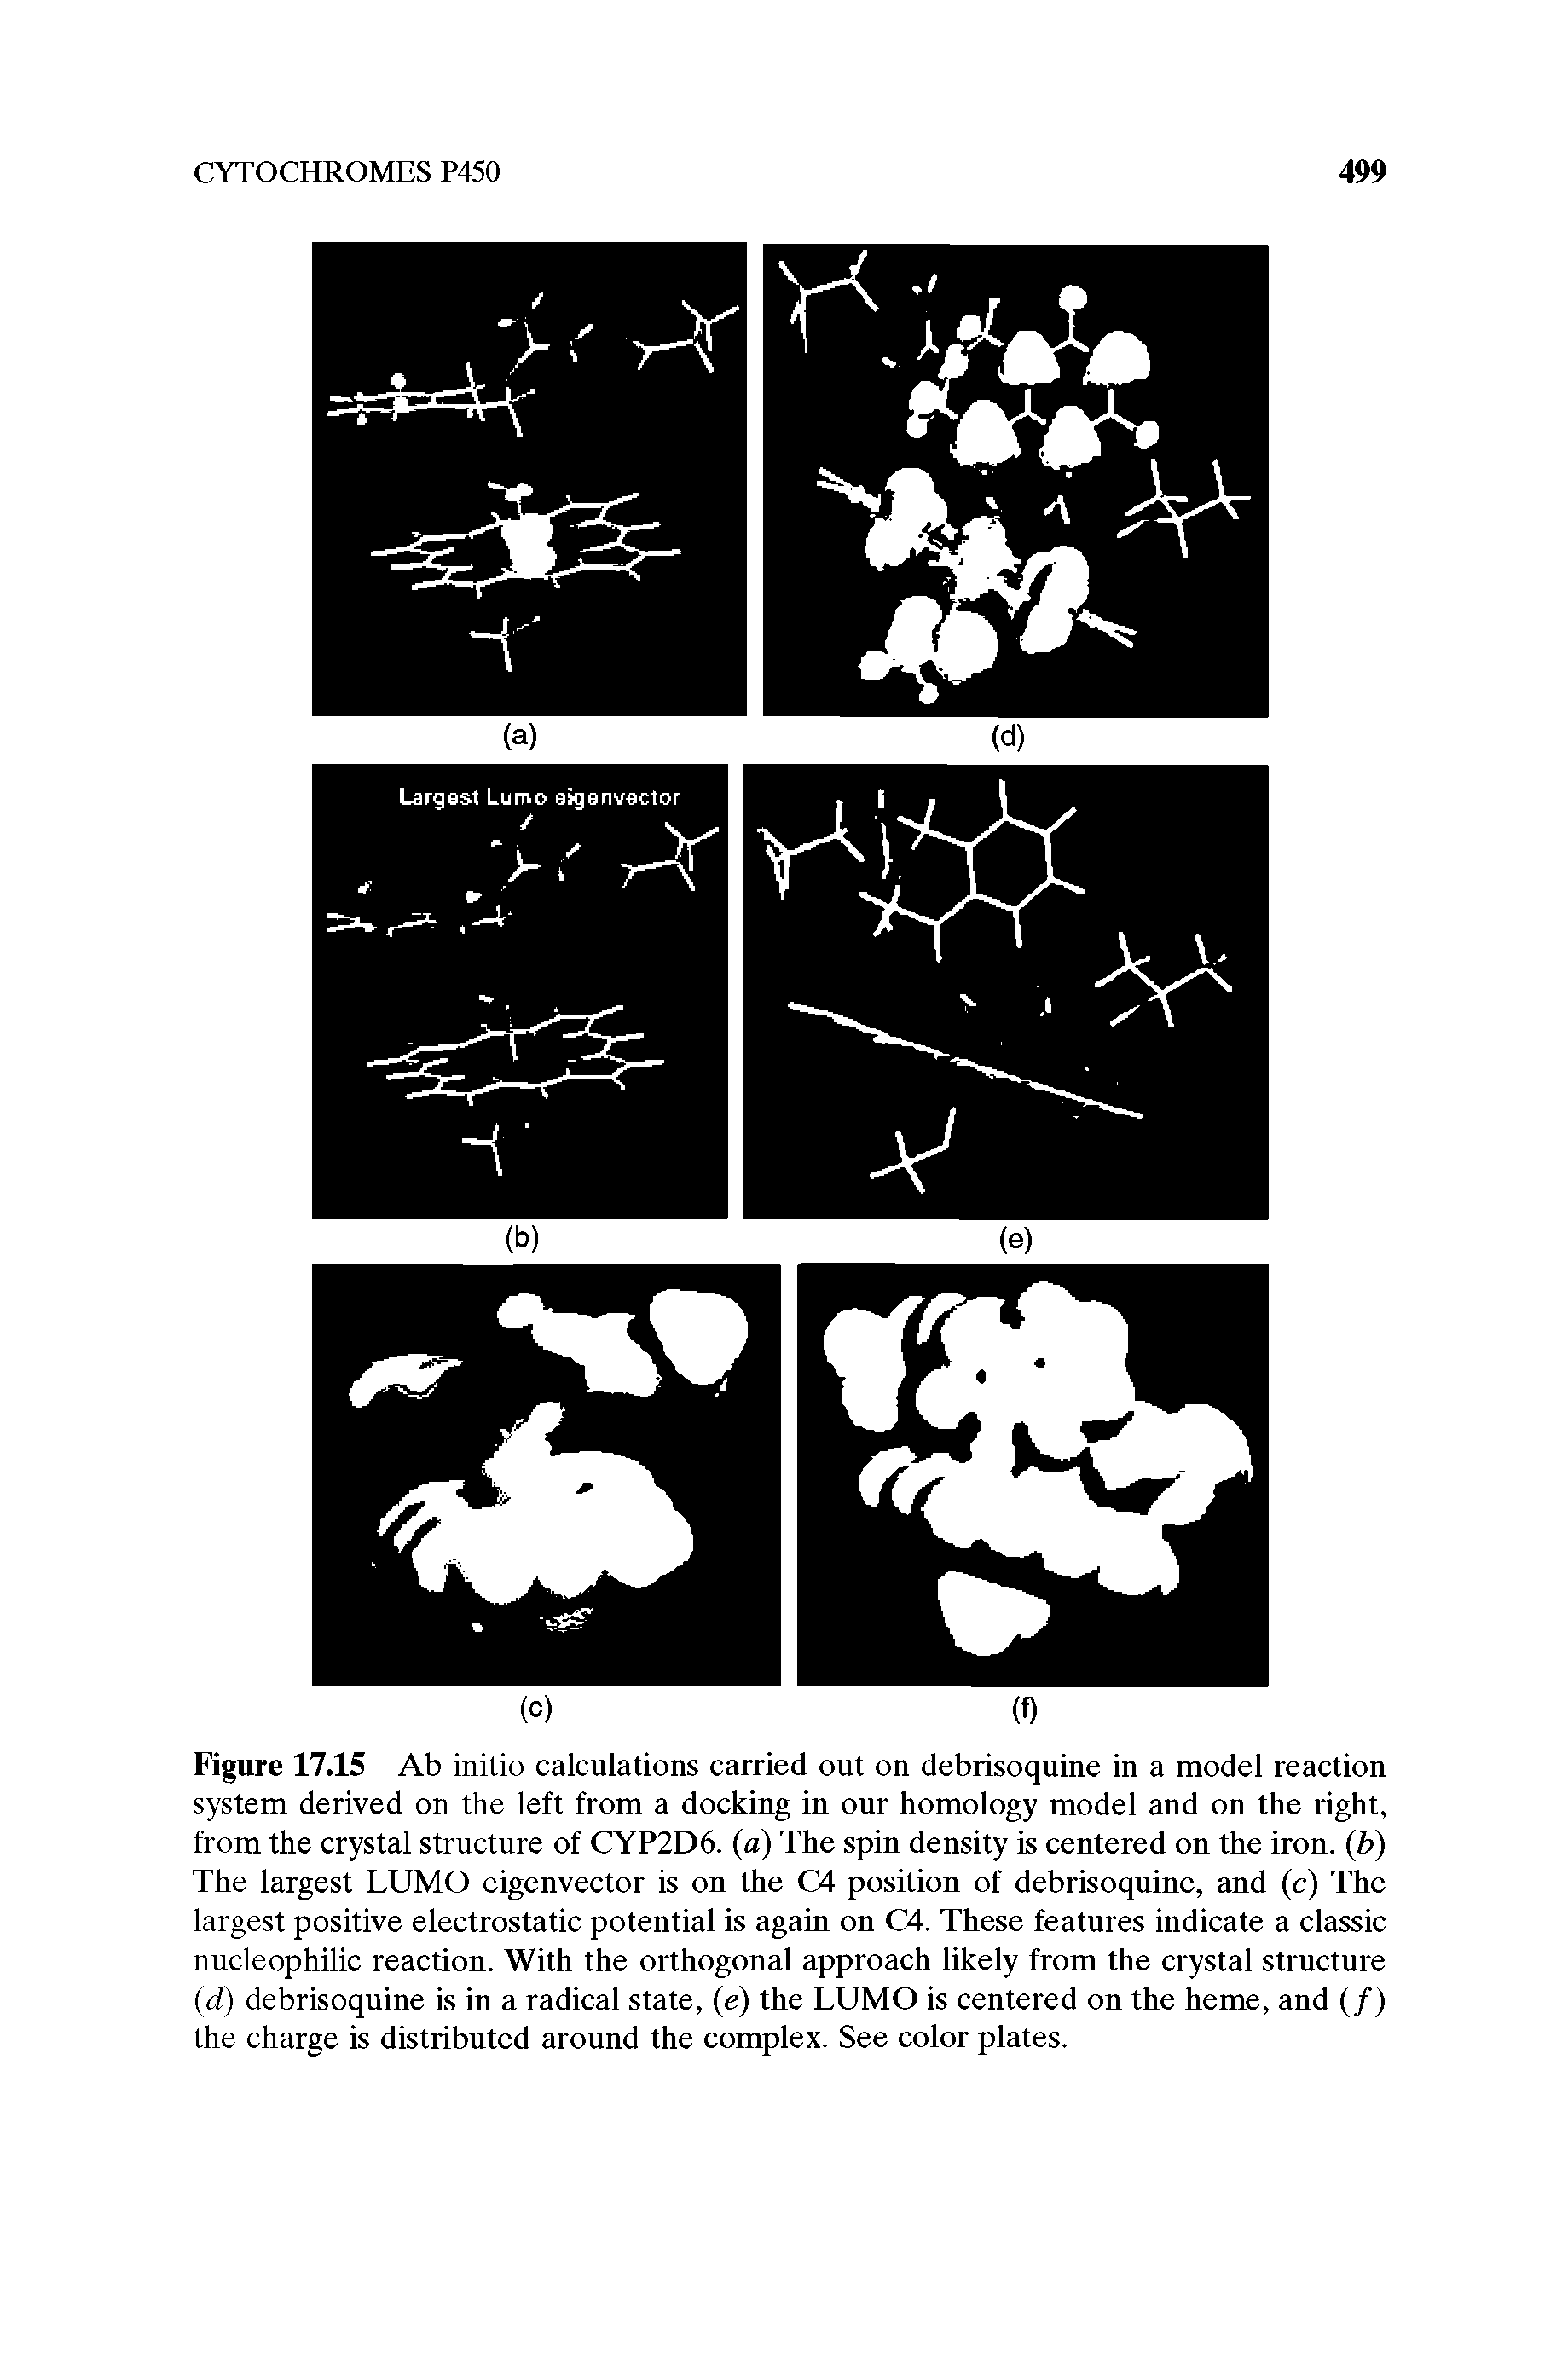 Figure 17.15 Ab initio calculations carried out on debrisoquine in a model reaction system derived on the left from a docking in our homology model and on the right, from the crystal structure of CYP2D6. (a) The spin density is centered on the iron. (b) The largest LUMO eigenvector is on the C4 position of debrisoquine, and (c) The largest positive electrostatic potential is again on C4. These features indicate a classic nucleophilic reaction. With the orthogonal approach likely from the crystal structure (d) debrisoquine is in a radical state, (e) the LUMO is centered on the heme, and (/) the charge is distributed around the complex. See color plates.